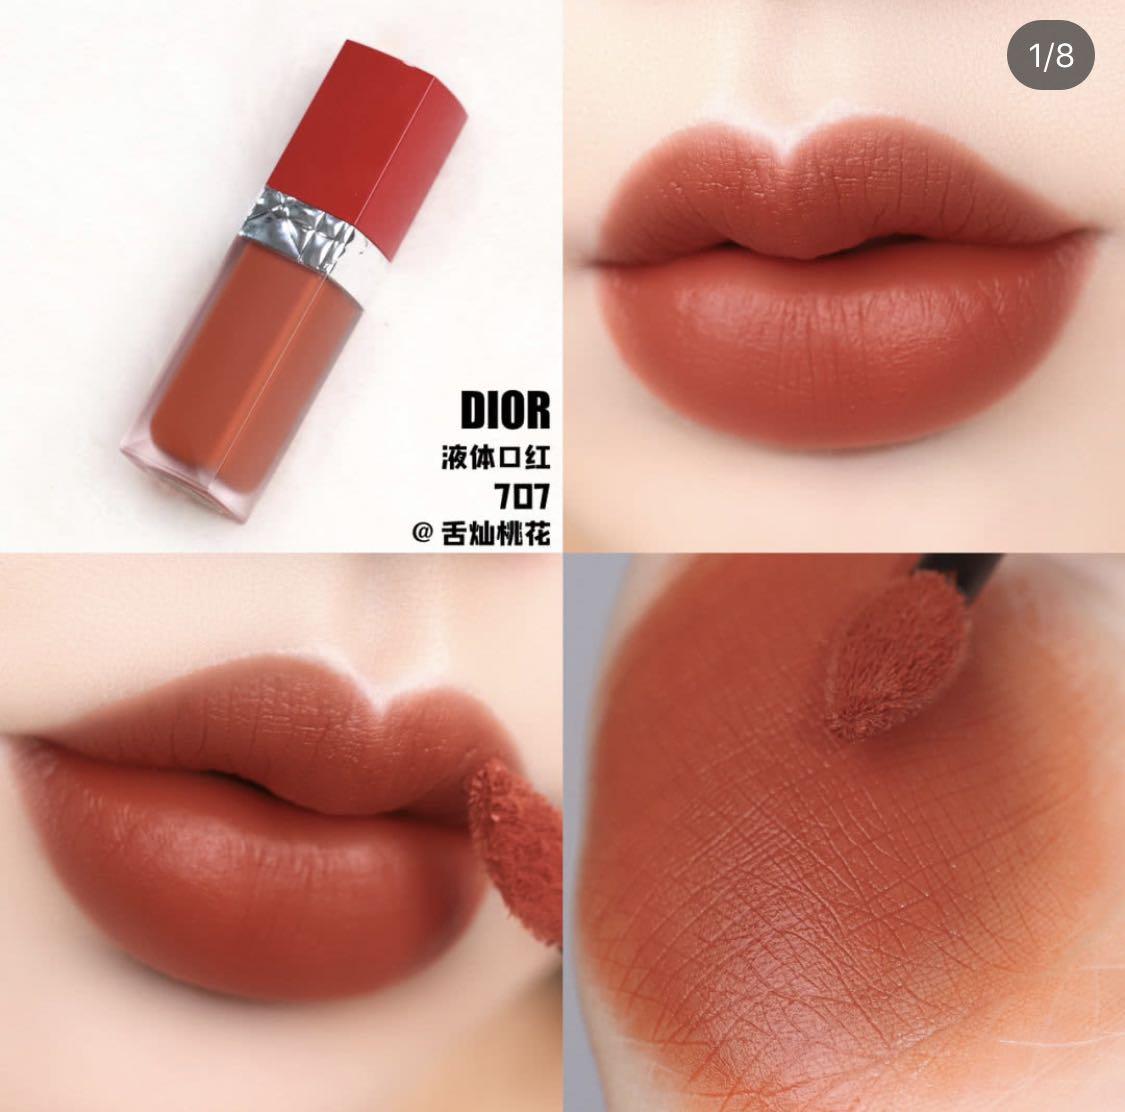 dior rouge ultra care 707